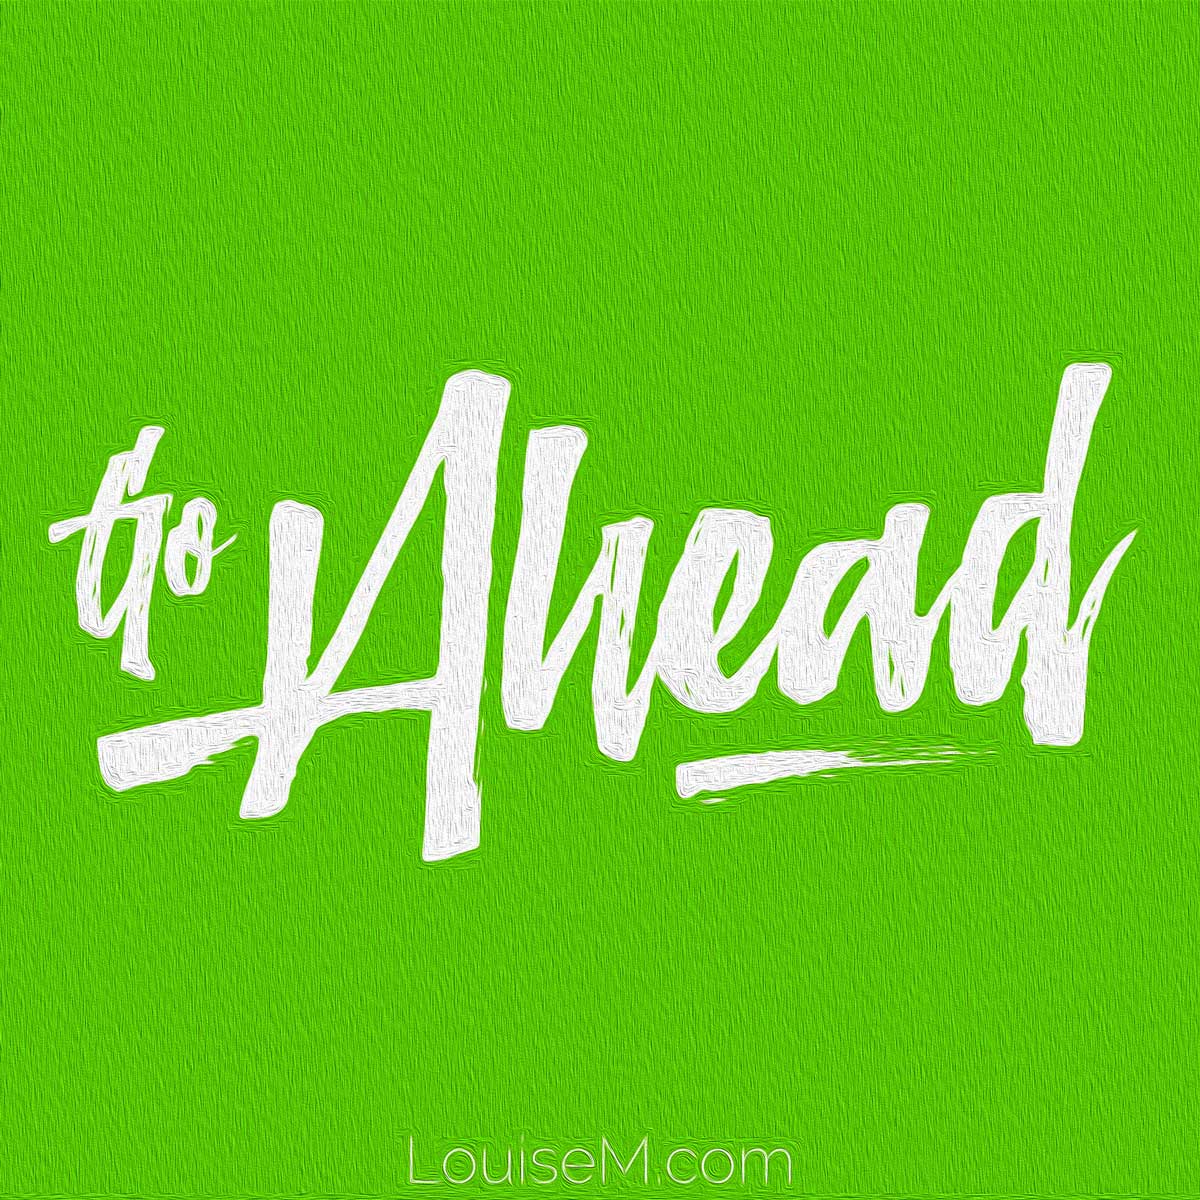 textured bright green graphic has white writing saying go ahead.